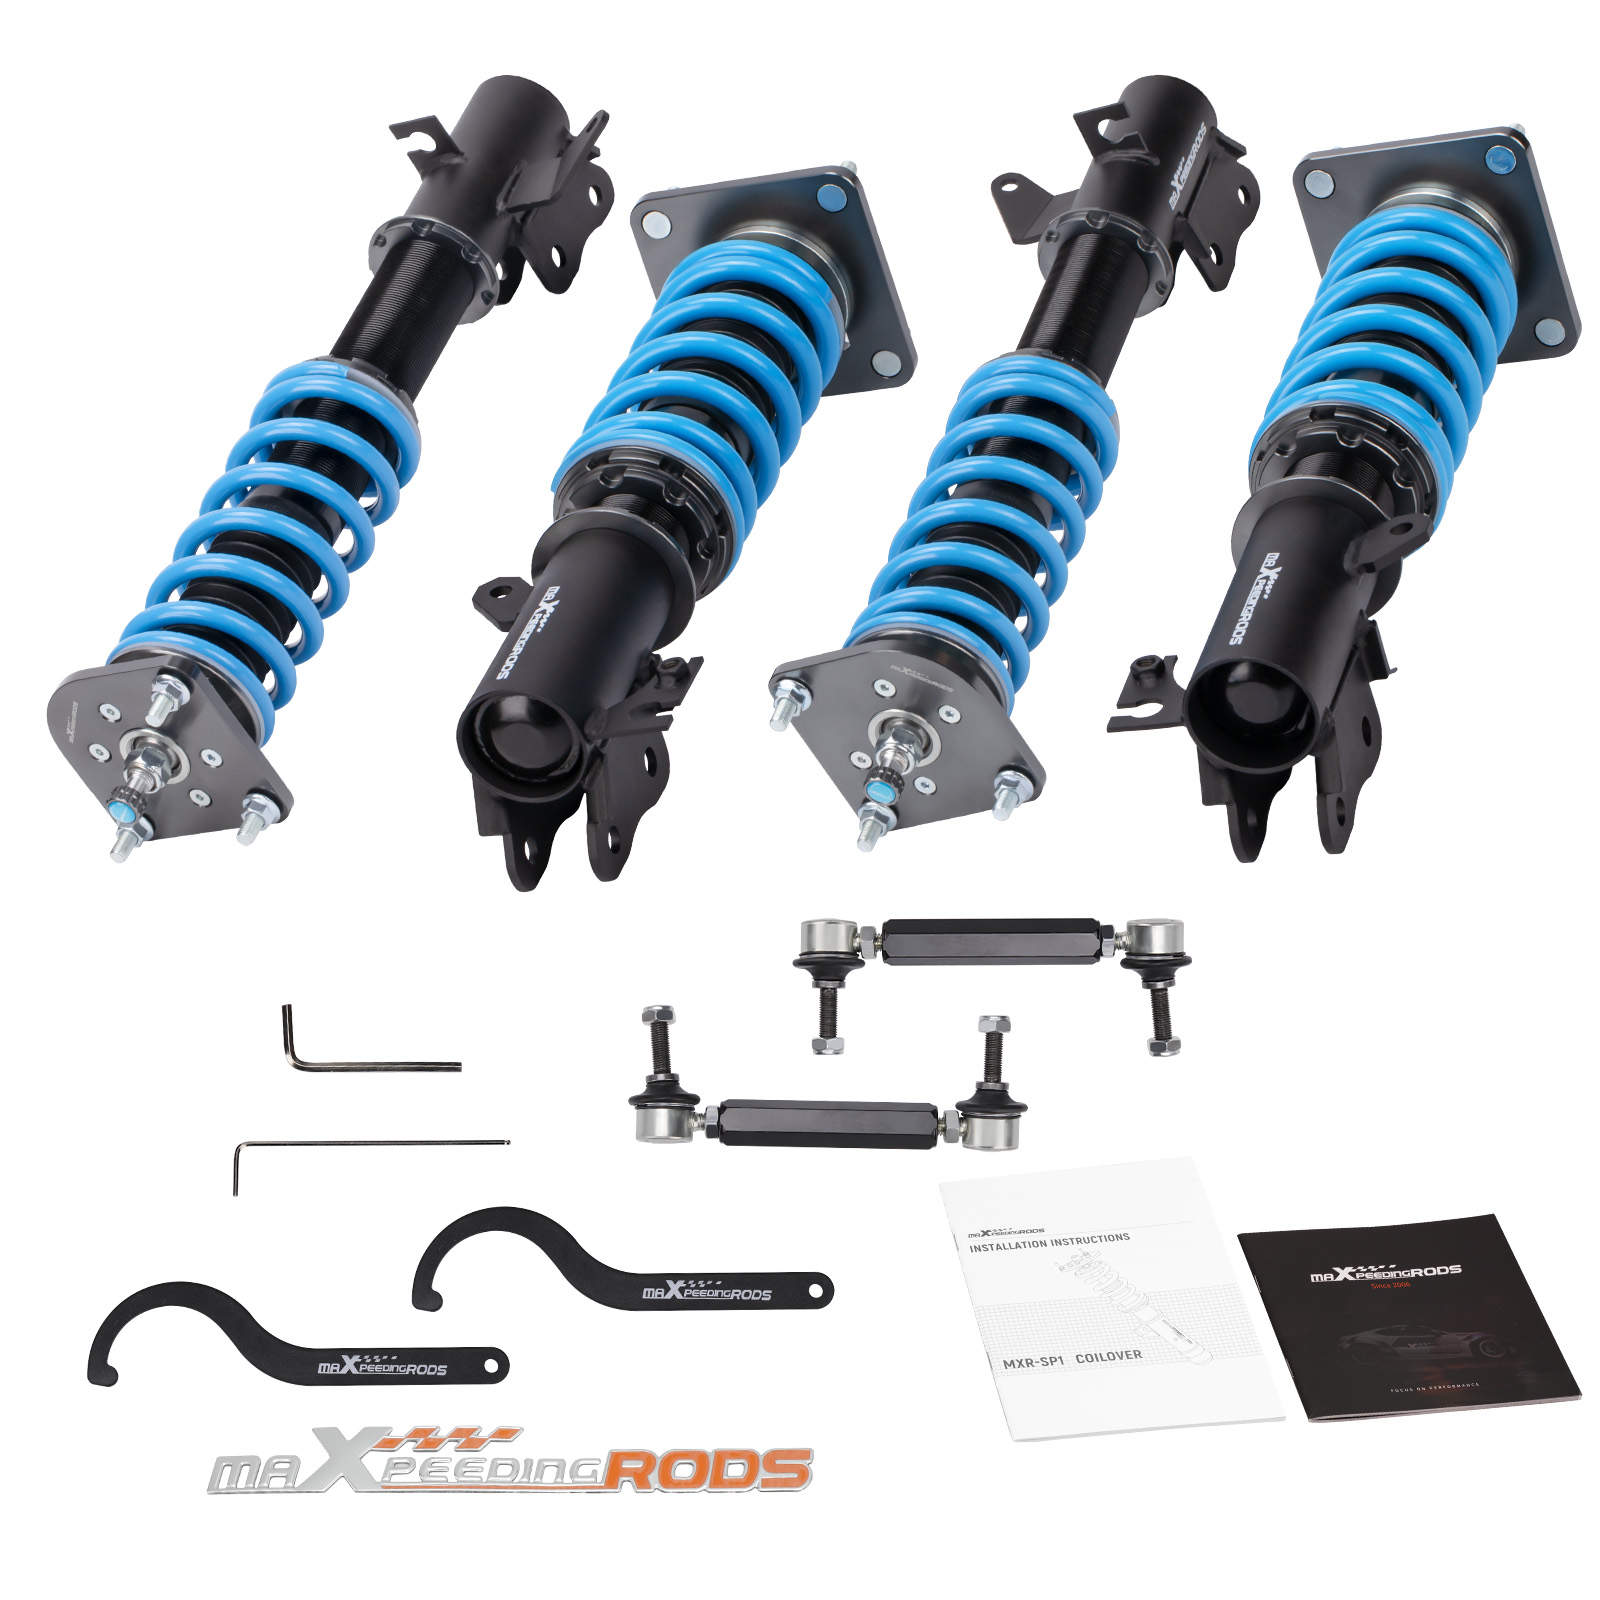 Maxpeedingrods COT6 Coilovers Lowering Kit compatible for Mazda 323 99-03  Shocks Absorbers-Maxpeedingrods